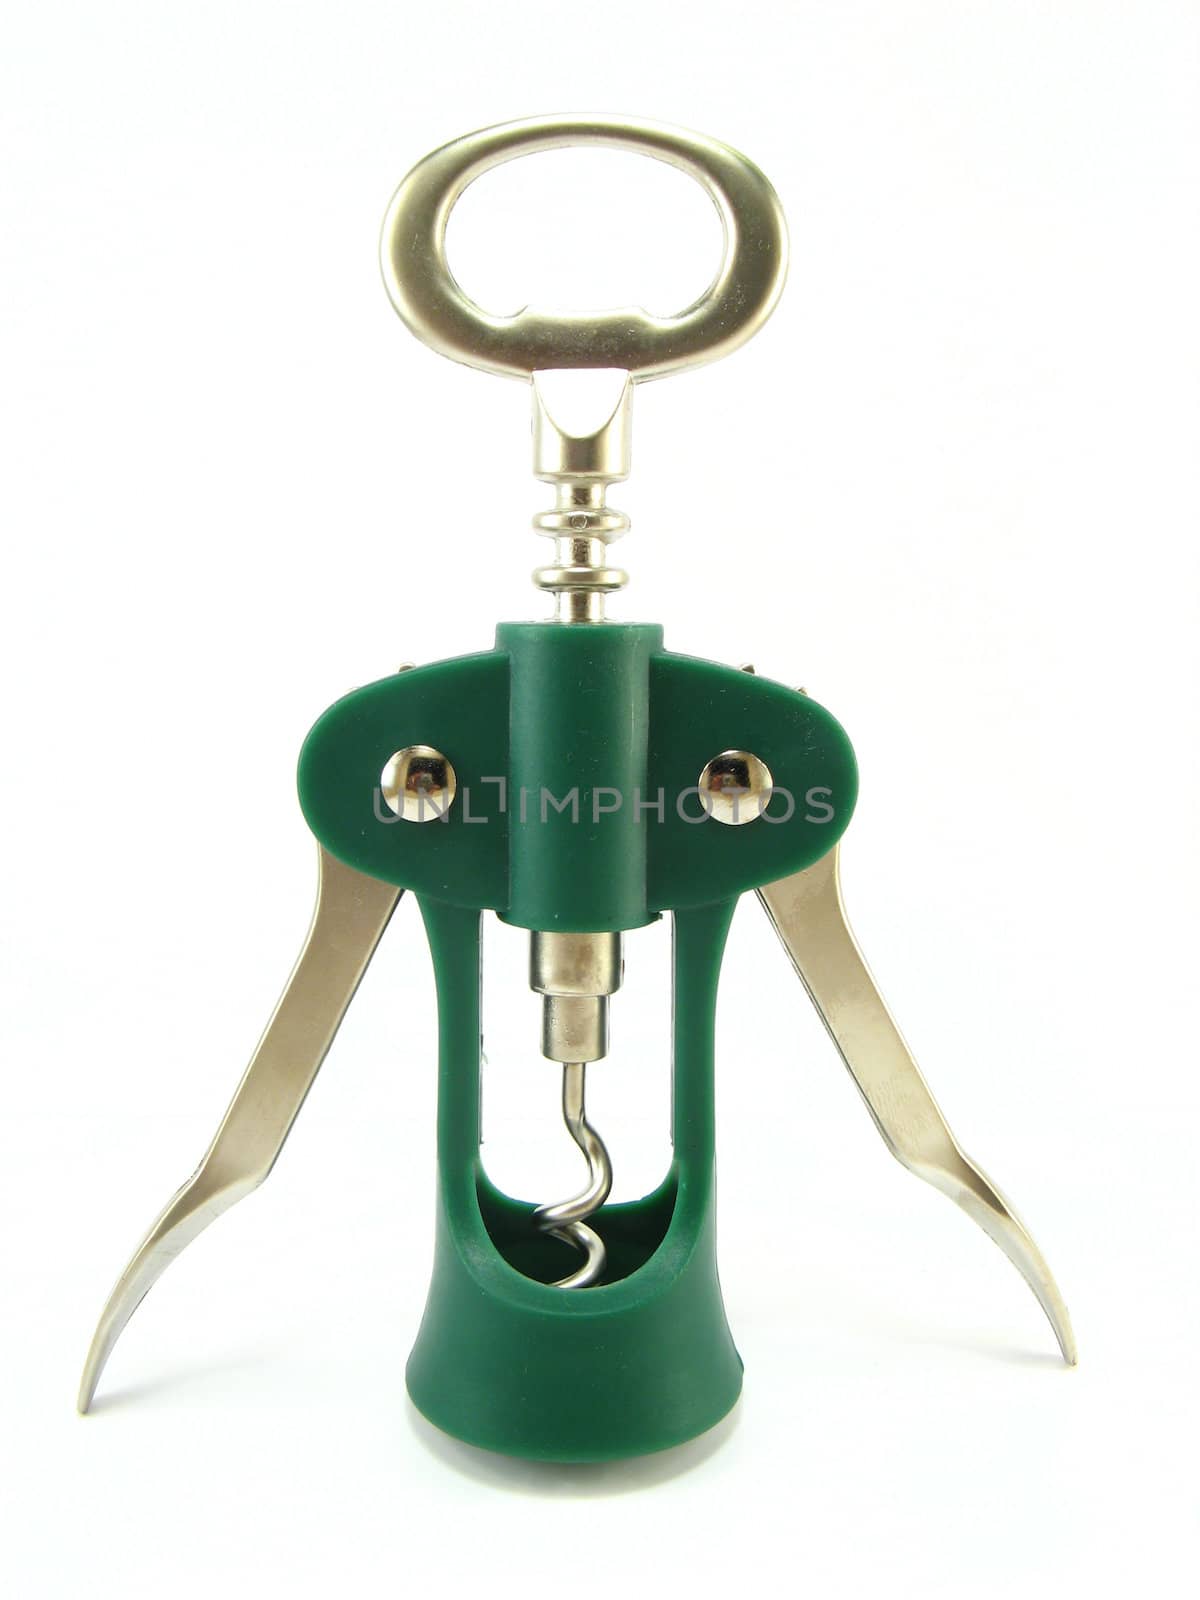 image of a green corkscrew on a white background